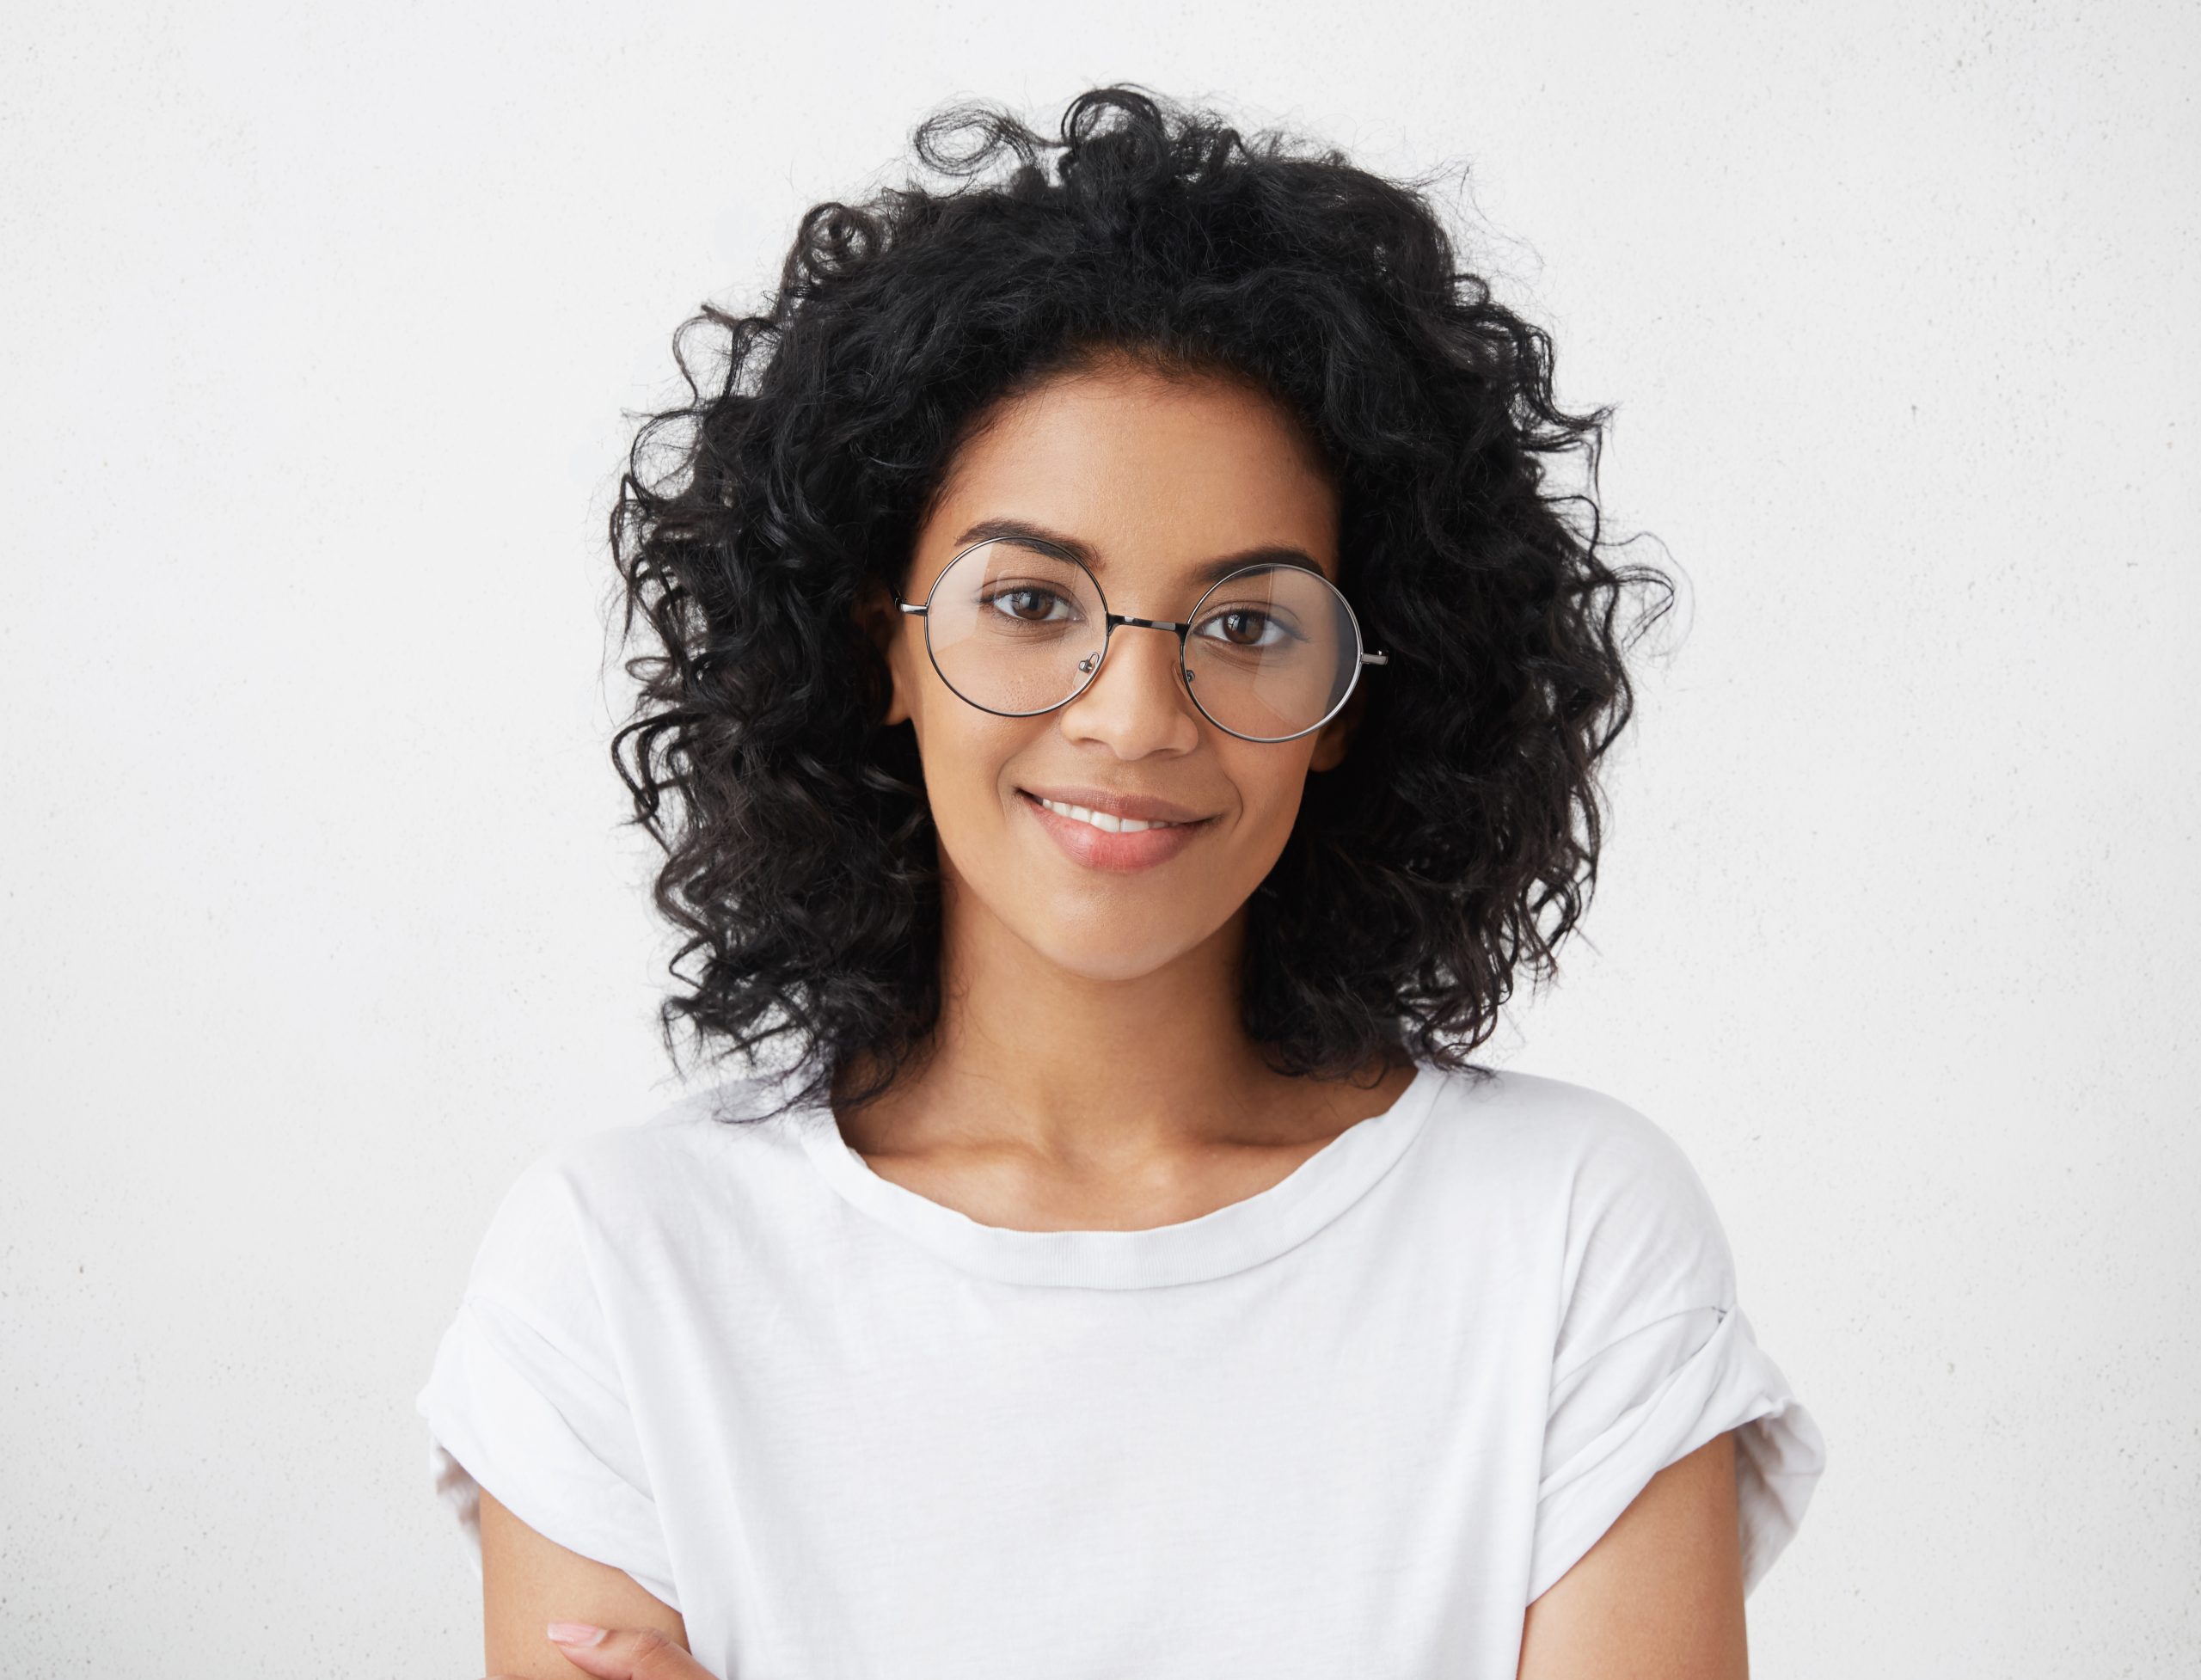 Portrait of a smiling woman with curly dark hair and glasses isolated on white background